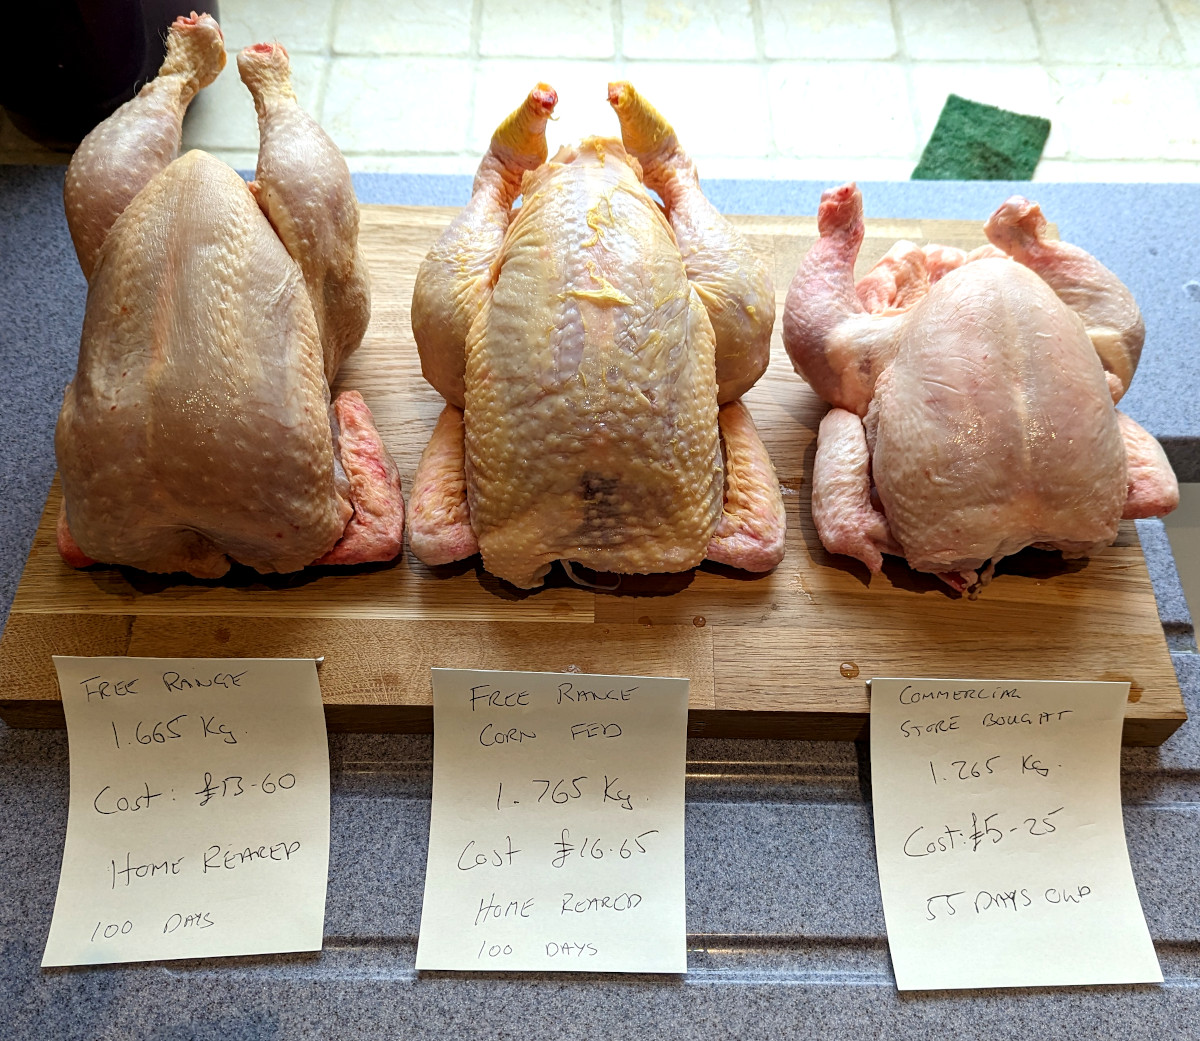 A selection of home reared broilers or meat chickens.